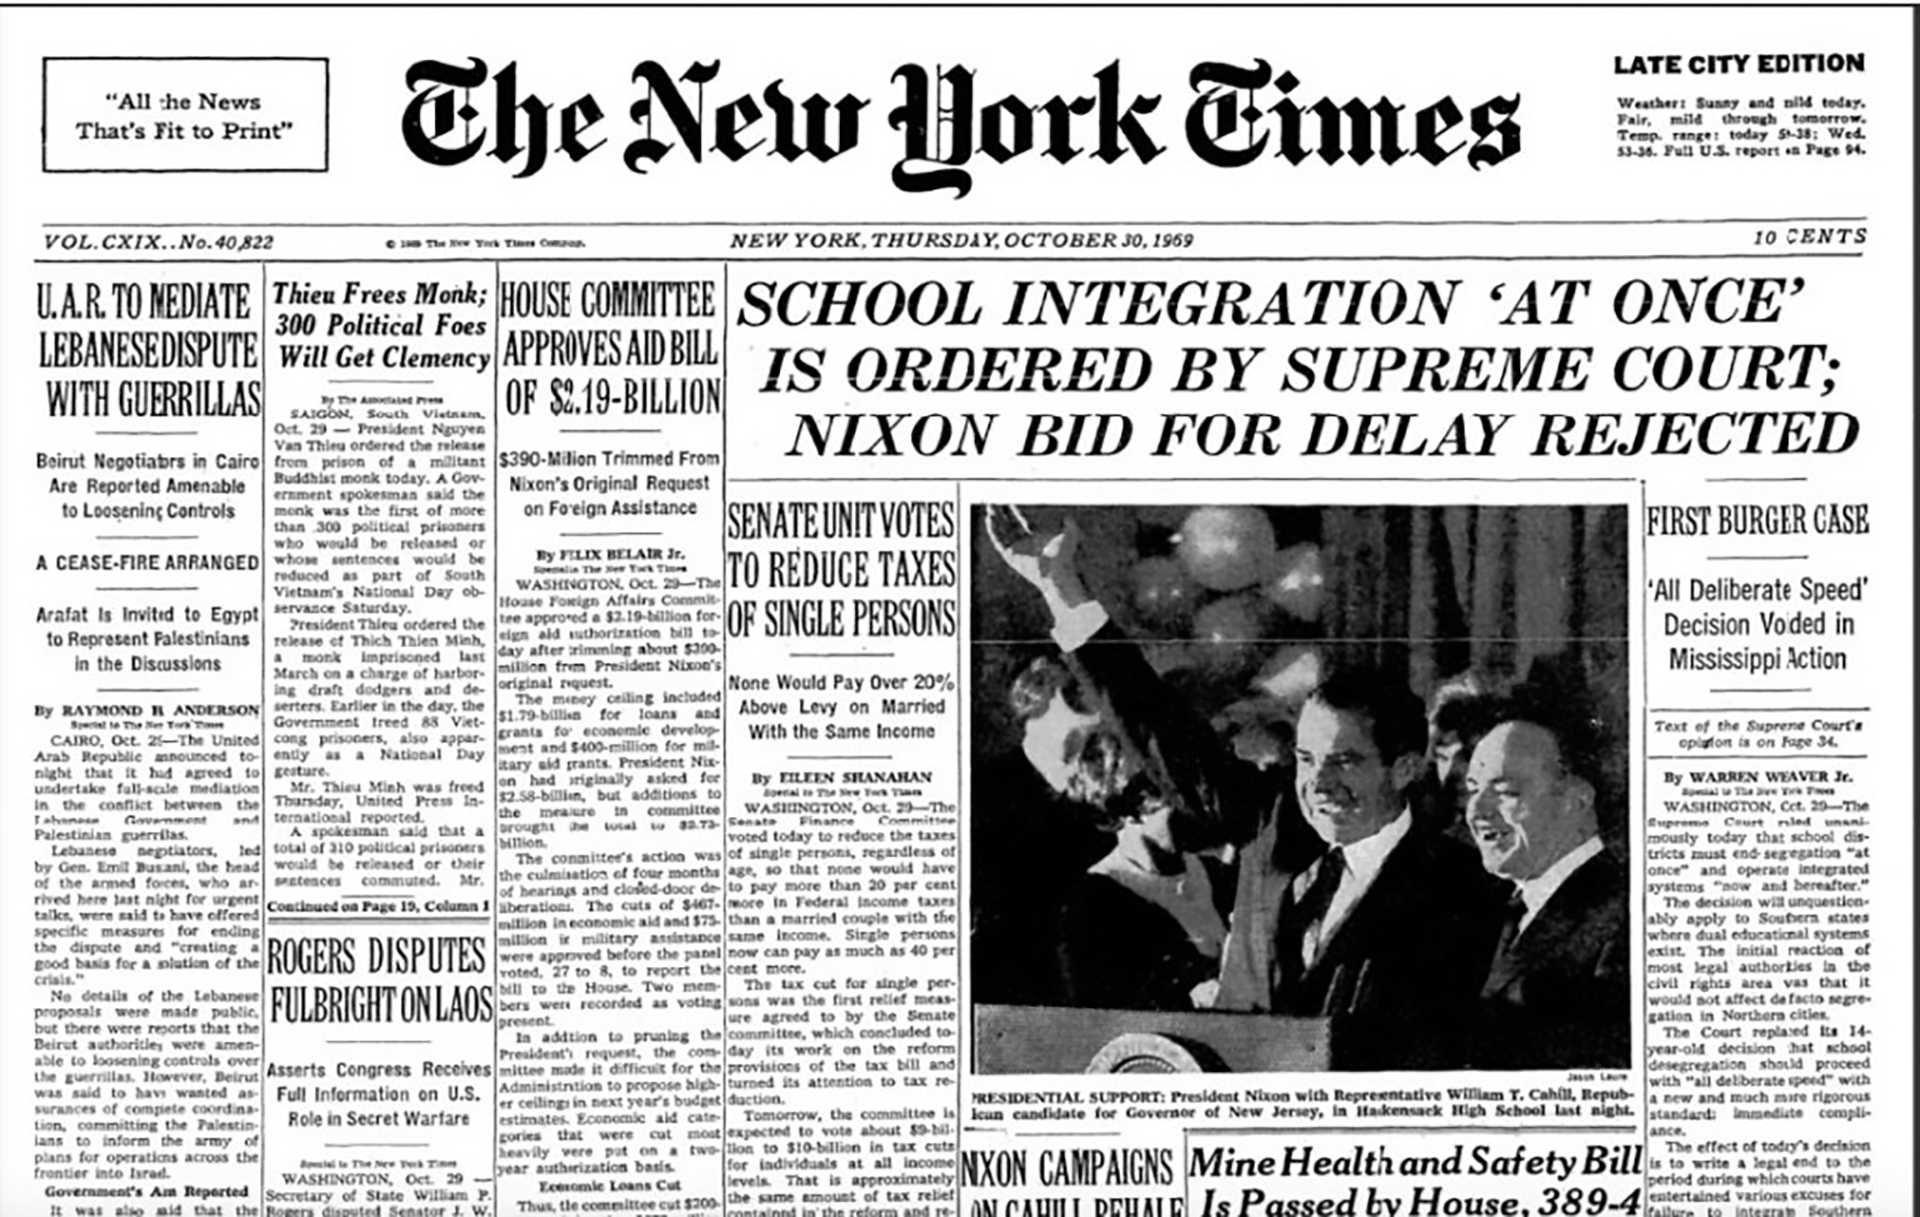 The 1969 headline in The New York Times when the U.S. Supreme Court voided the "with all deliberate speed" decision contained in Brown v. Board of Education, instead ordering public schools to integrate "at once." The decision prompted the creation of whites-only segregation academies all over the South. (Courtesy of The Admissions Project Digital Archive)